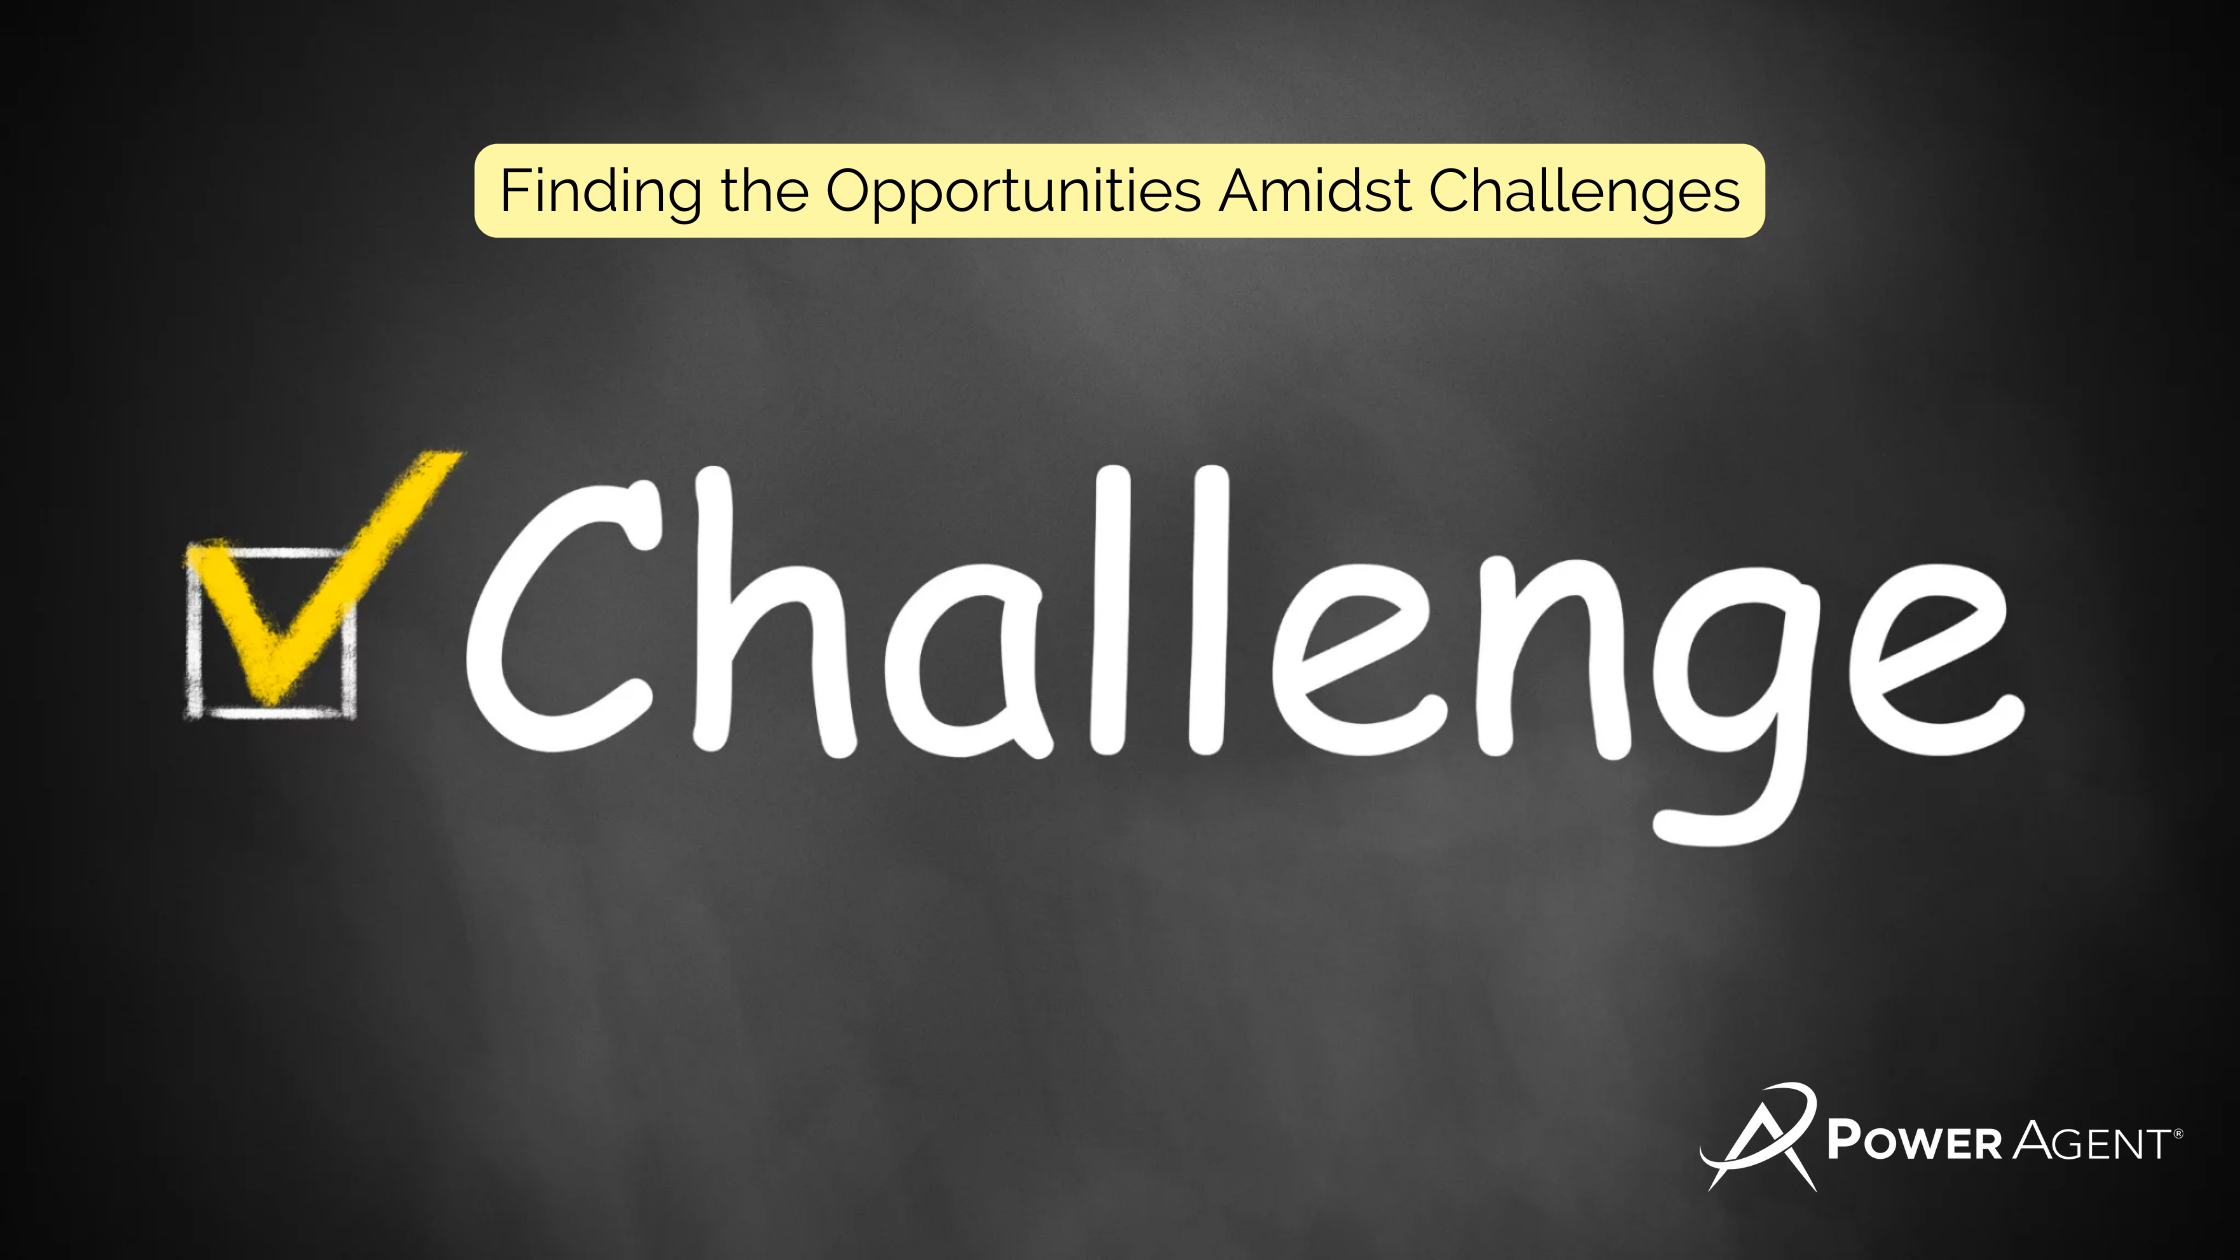 Finding the Opportunities Amidst Challenges